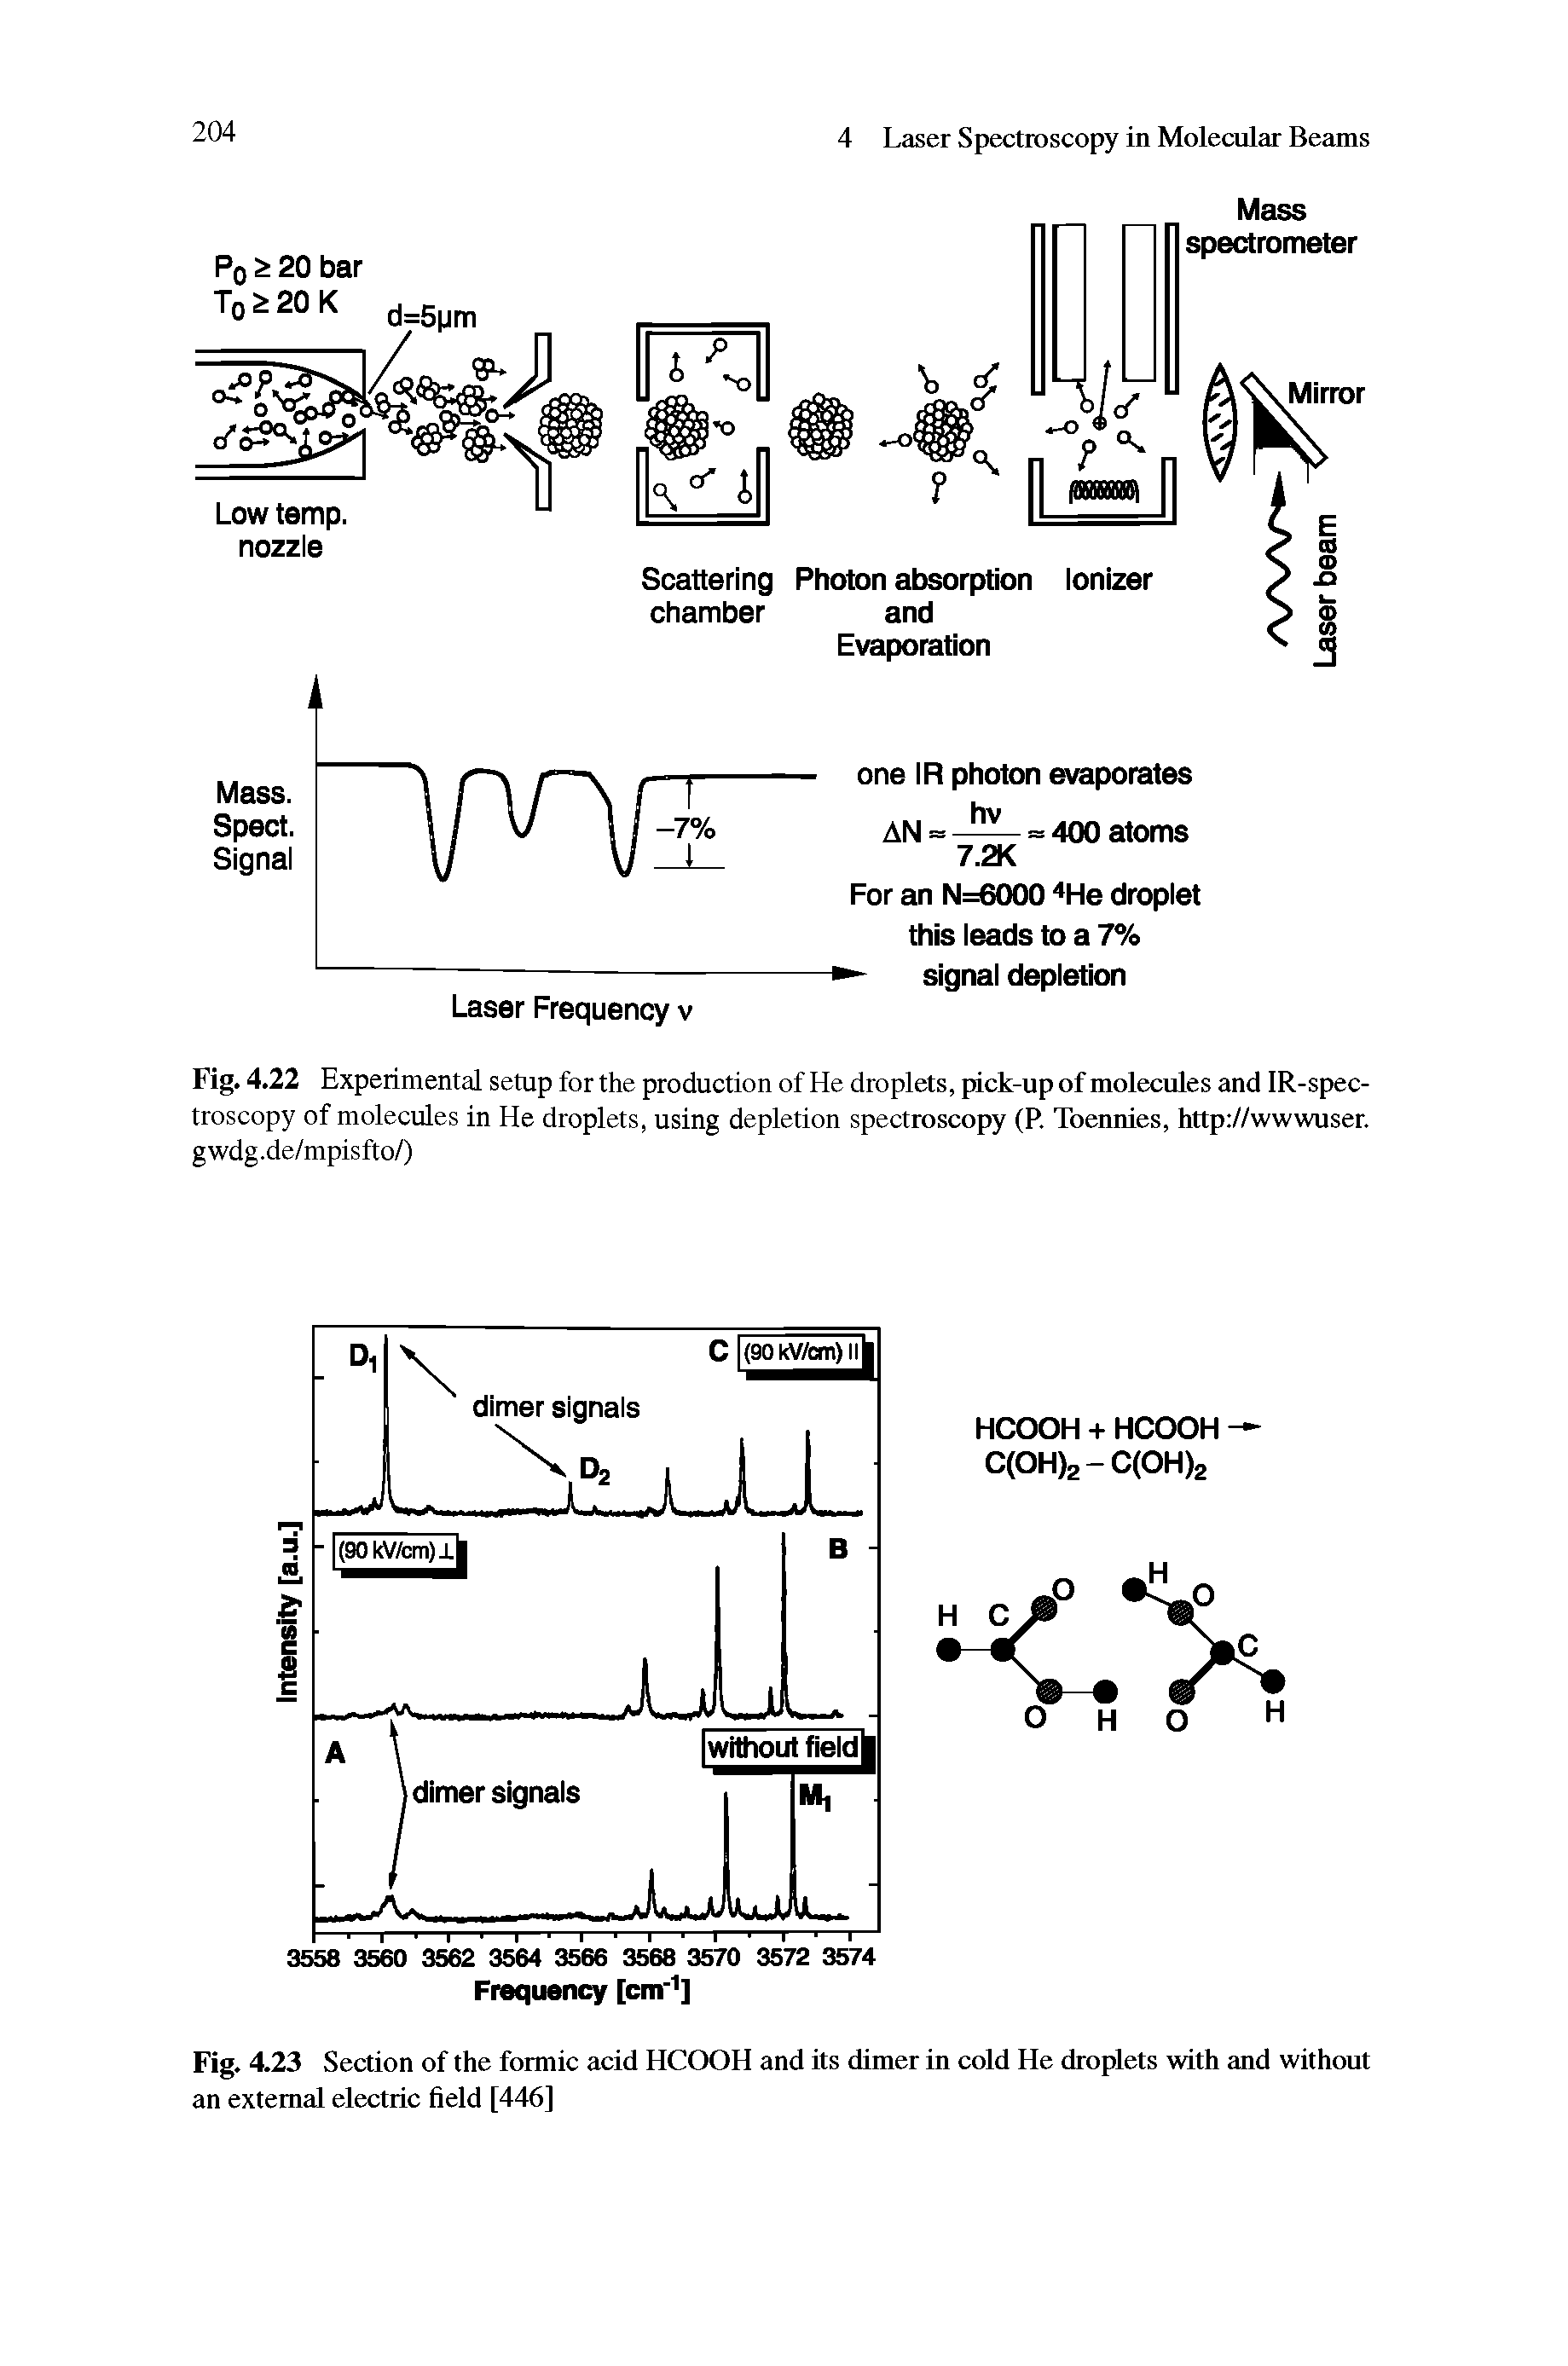 Fig. 4.22 Experimental setup for the production of He droplets, pick-up of molecules and IR-spec-troscopy of molecules in He droplets, using depletion spectroscopy (P. Toennies, http //wwwuser. gwdg.de/mpisfto/)...